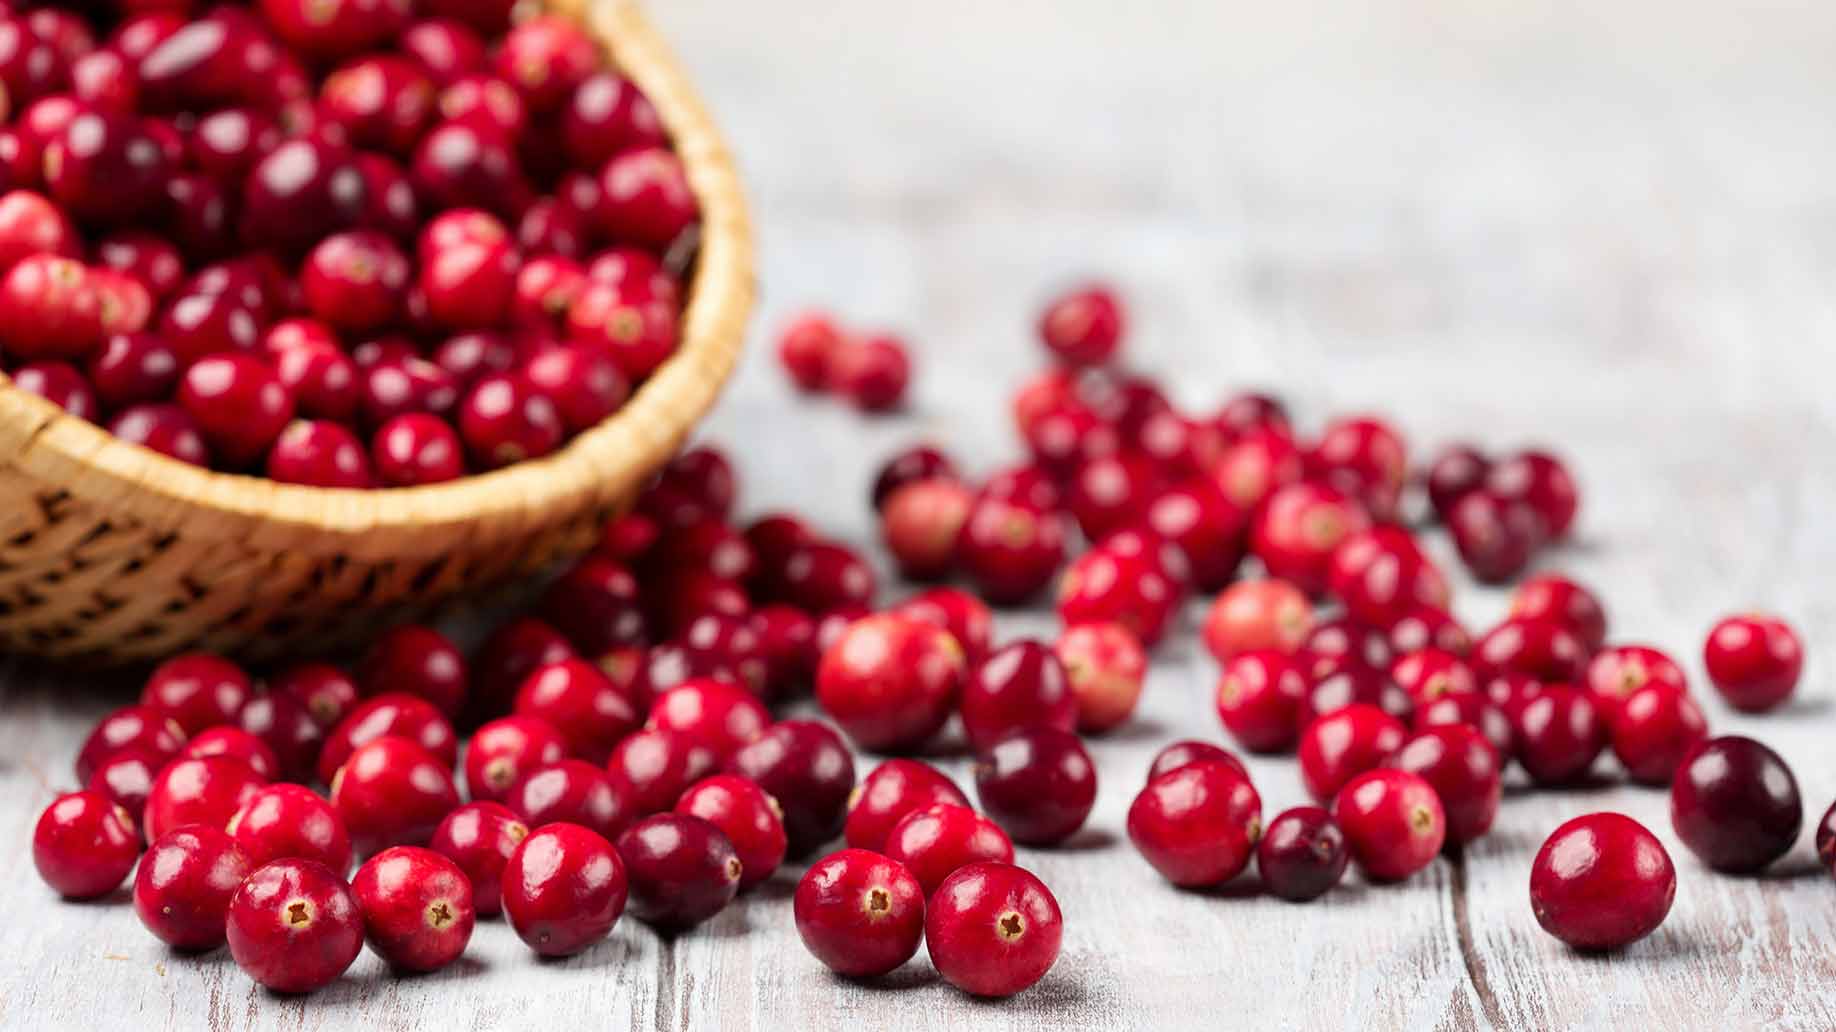 cranberries urinary tract infection uti natural remedies red berries